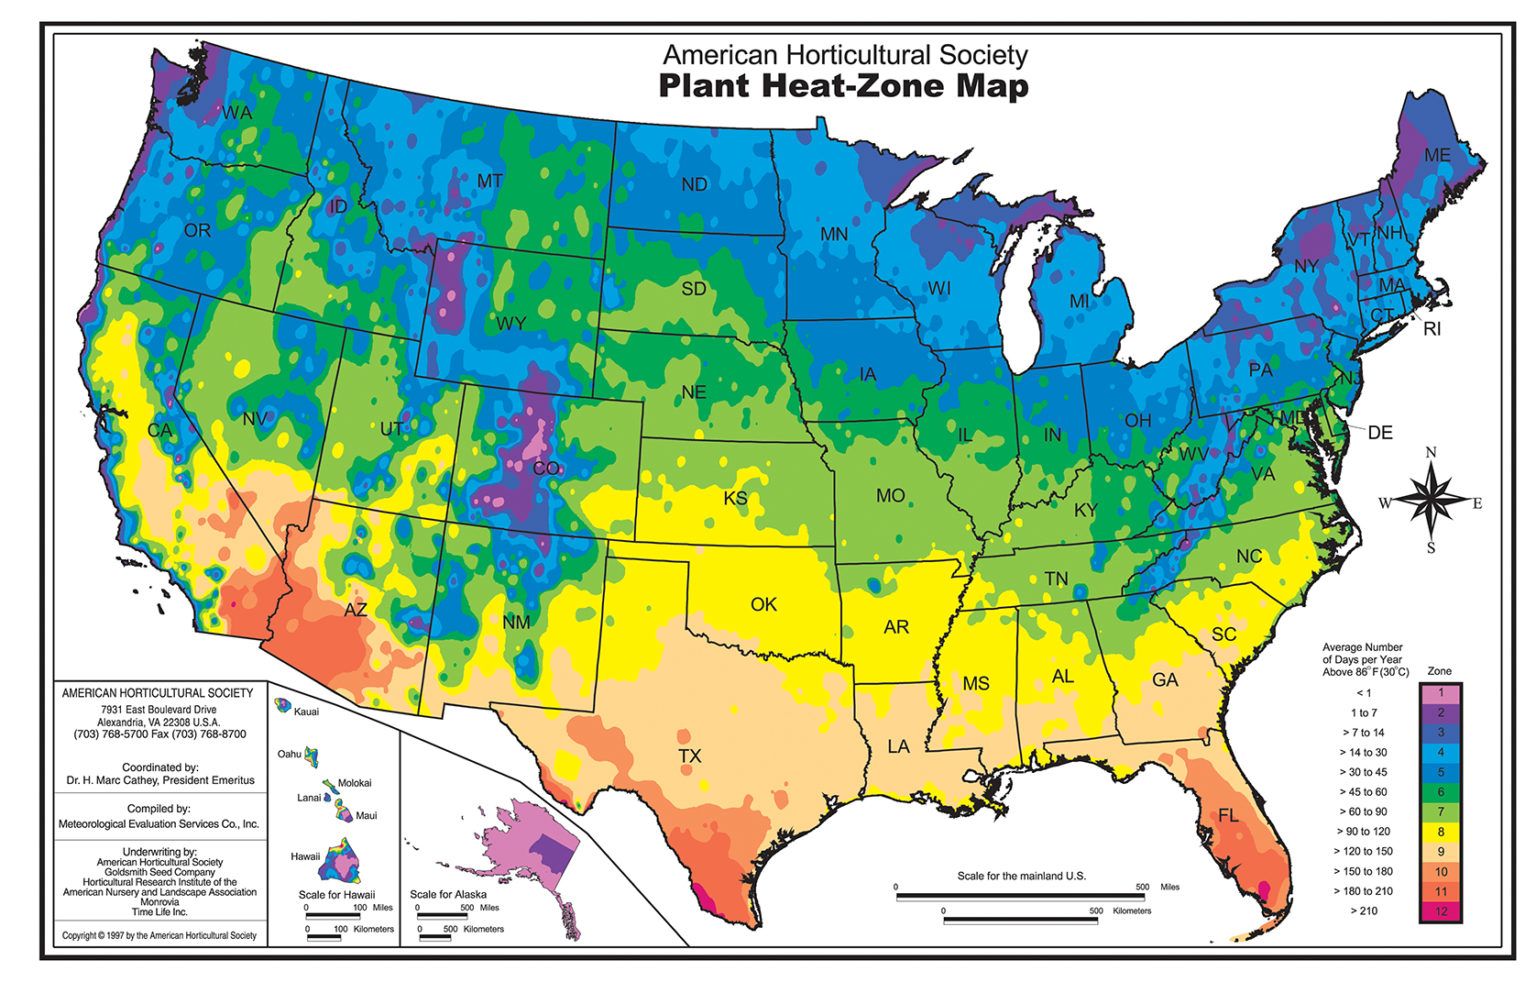 Heat Zone Map developed American Horticultural Society